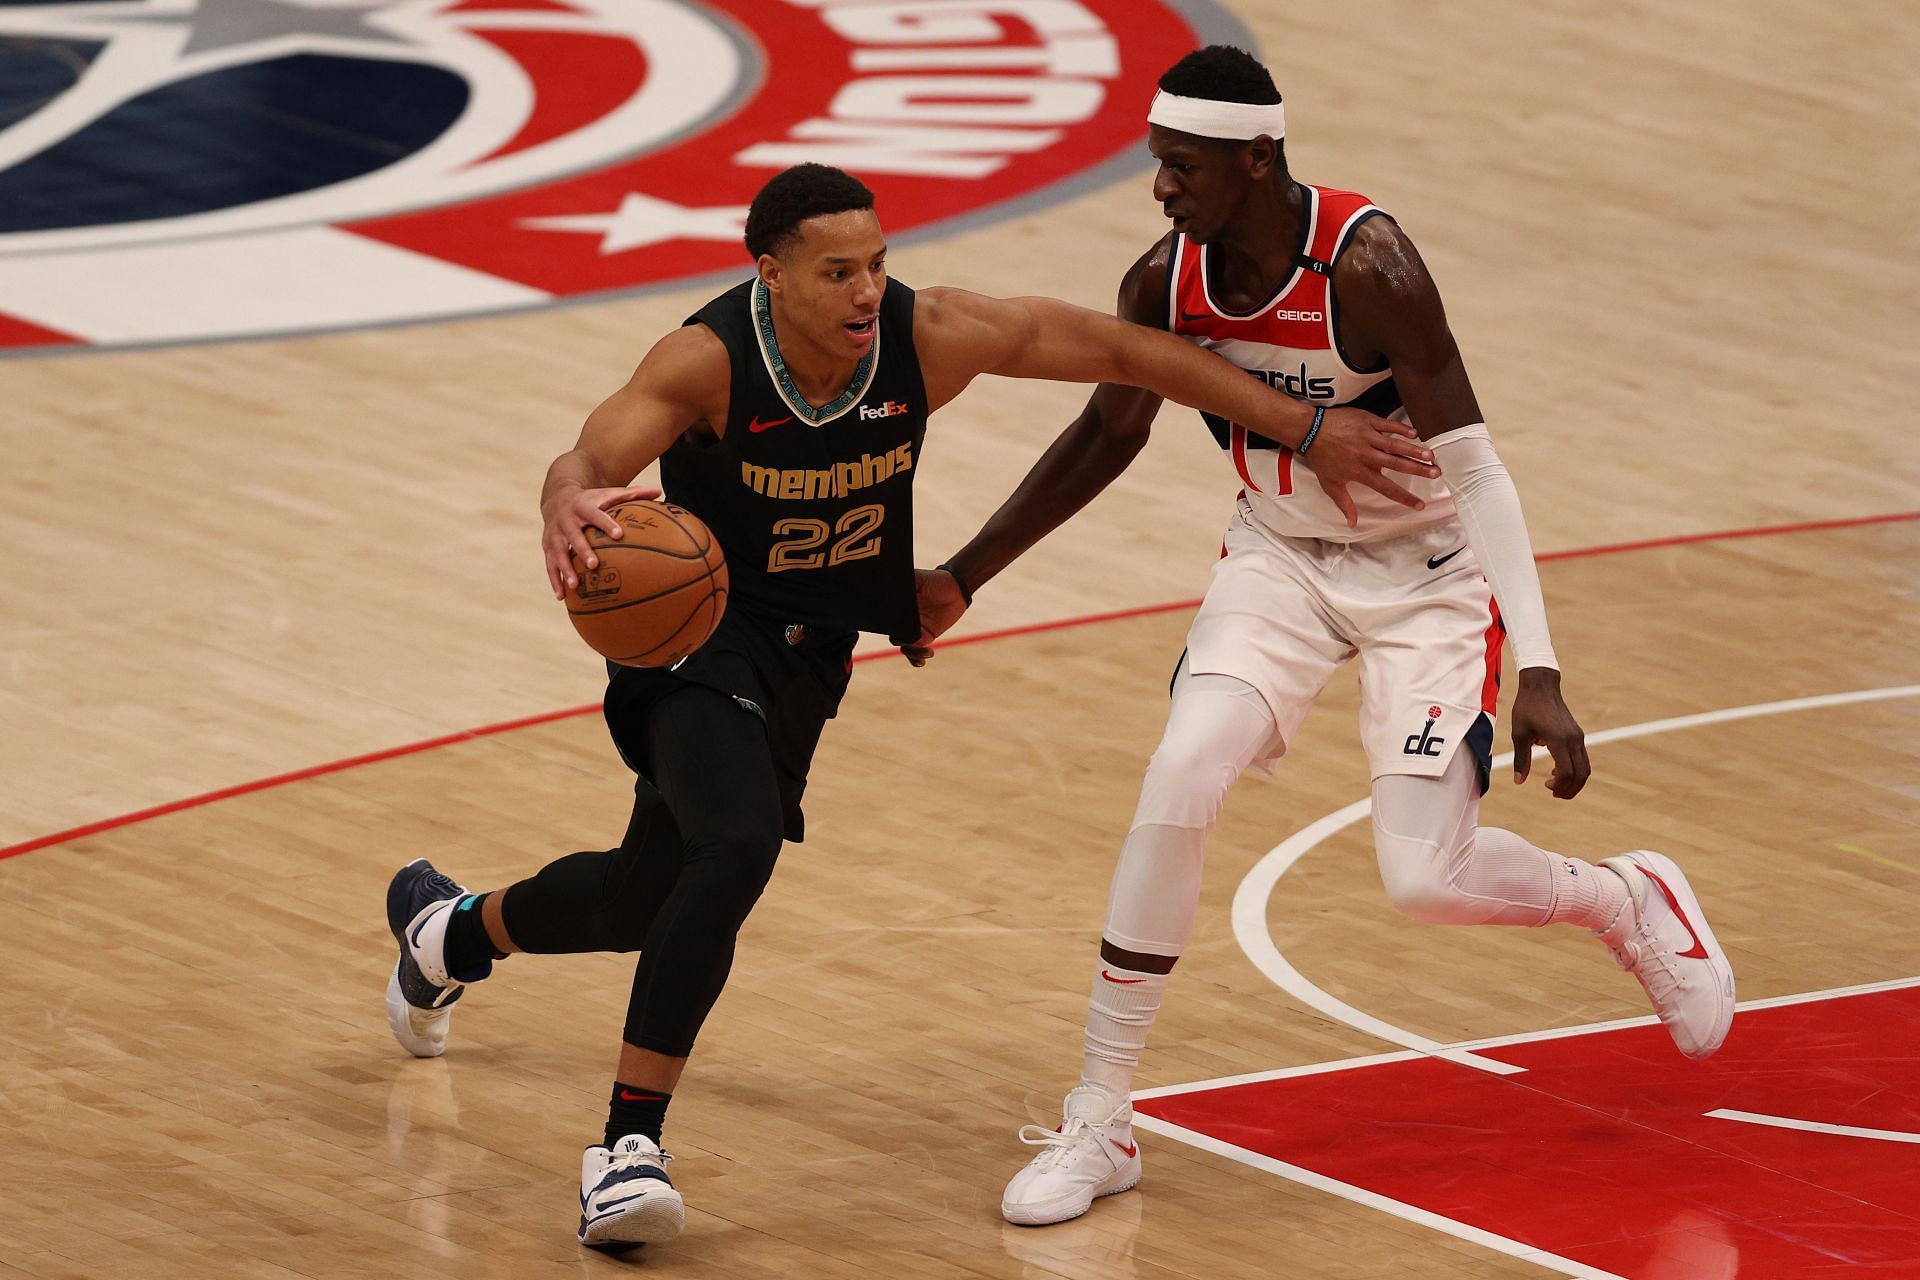 Desmond Bane #22 of the Memphis Grizzlies in action against the Washington Wizards